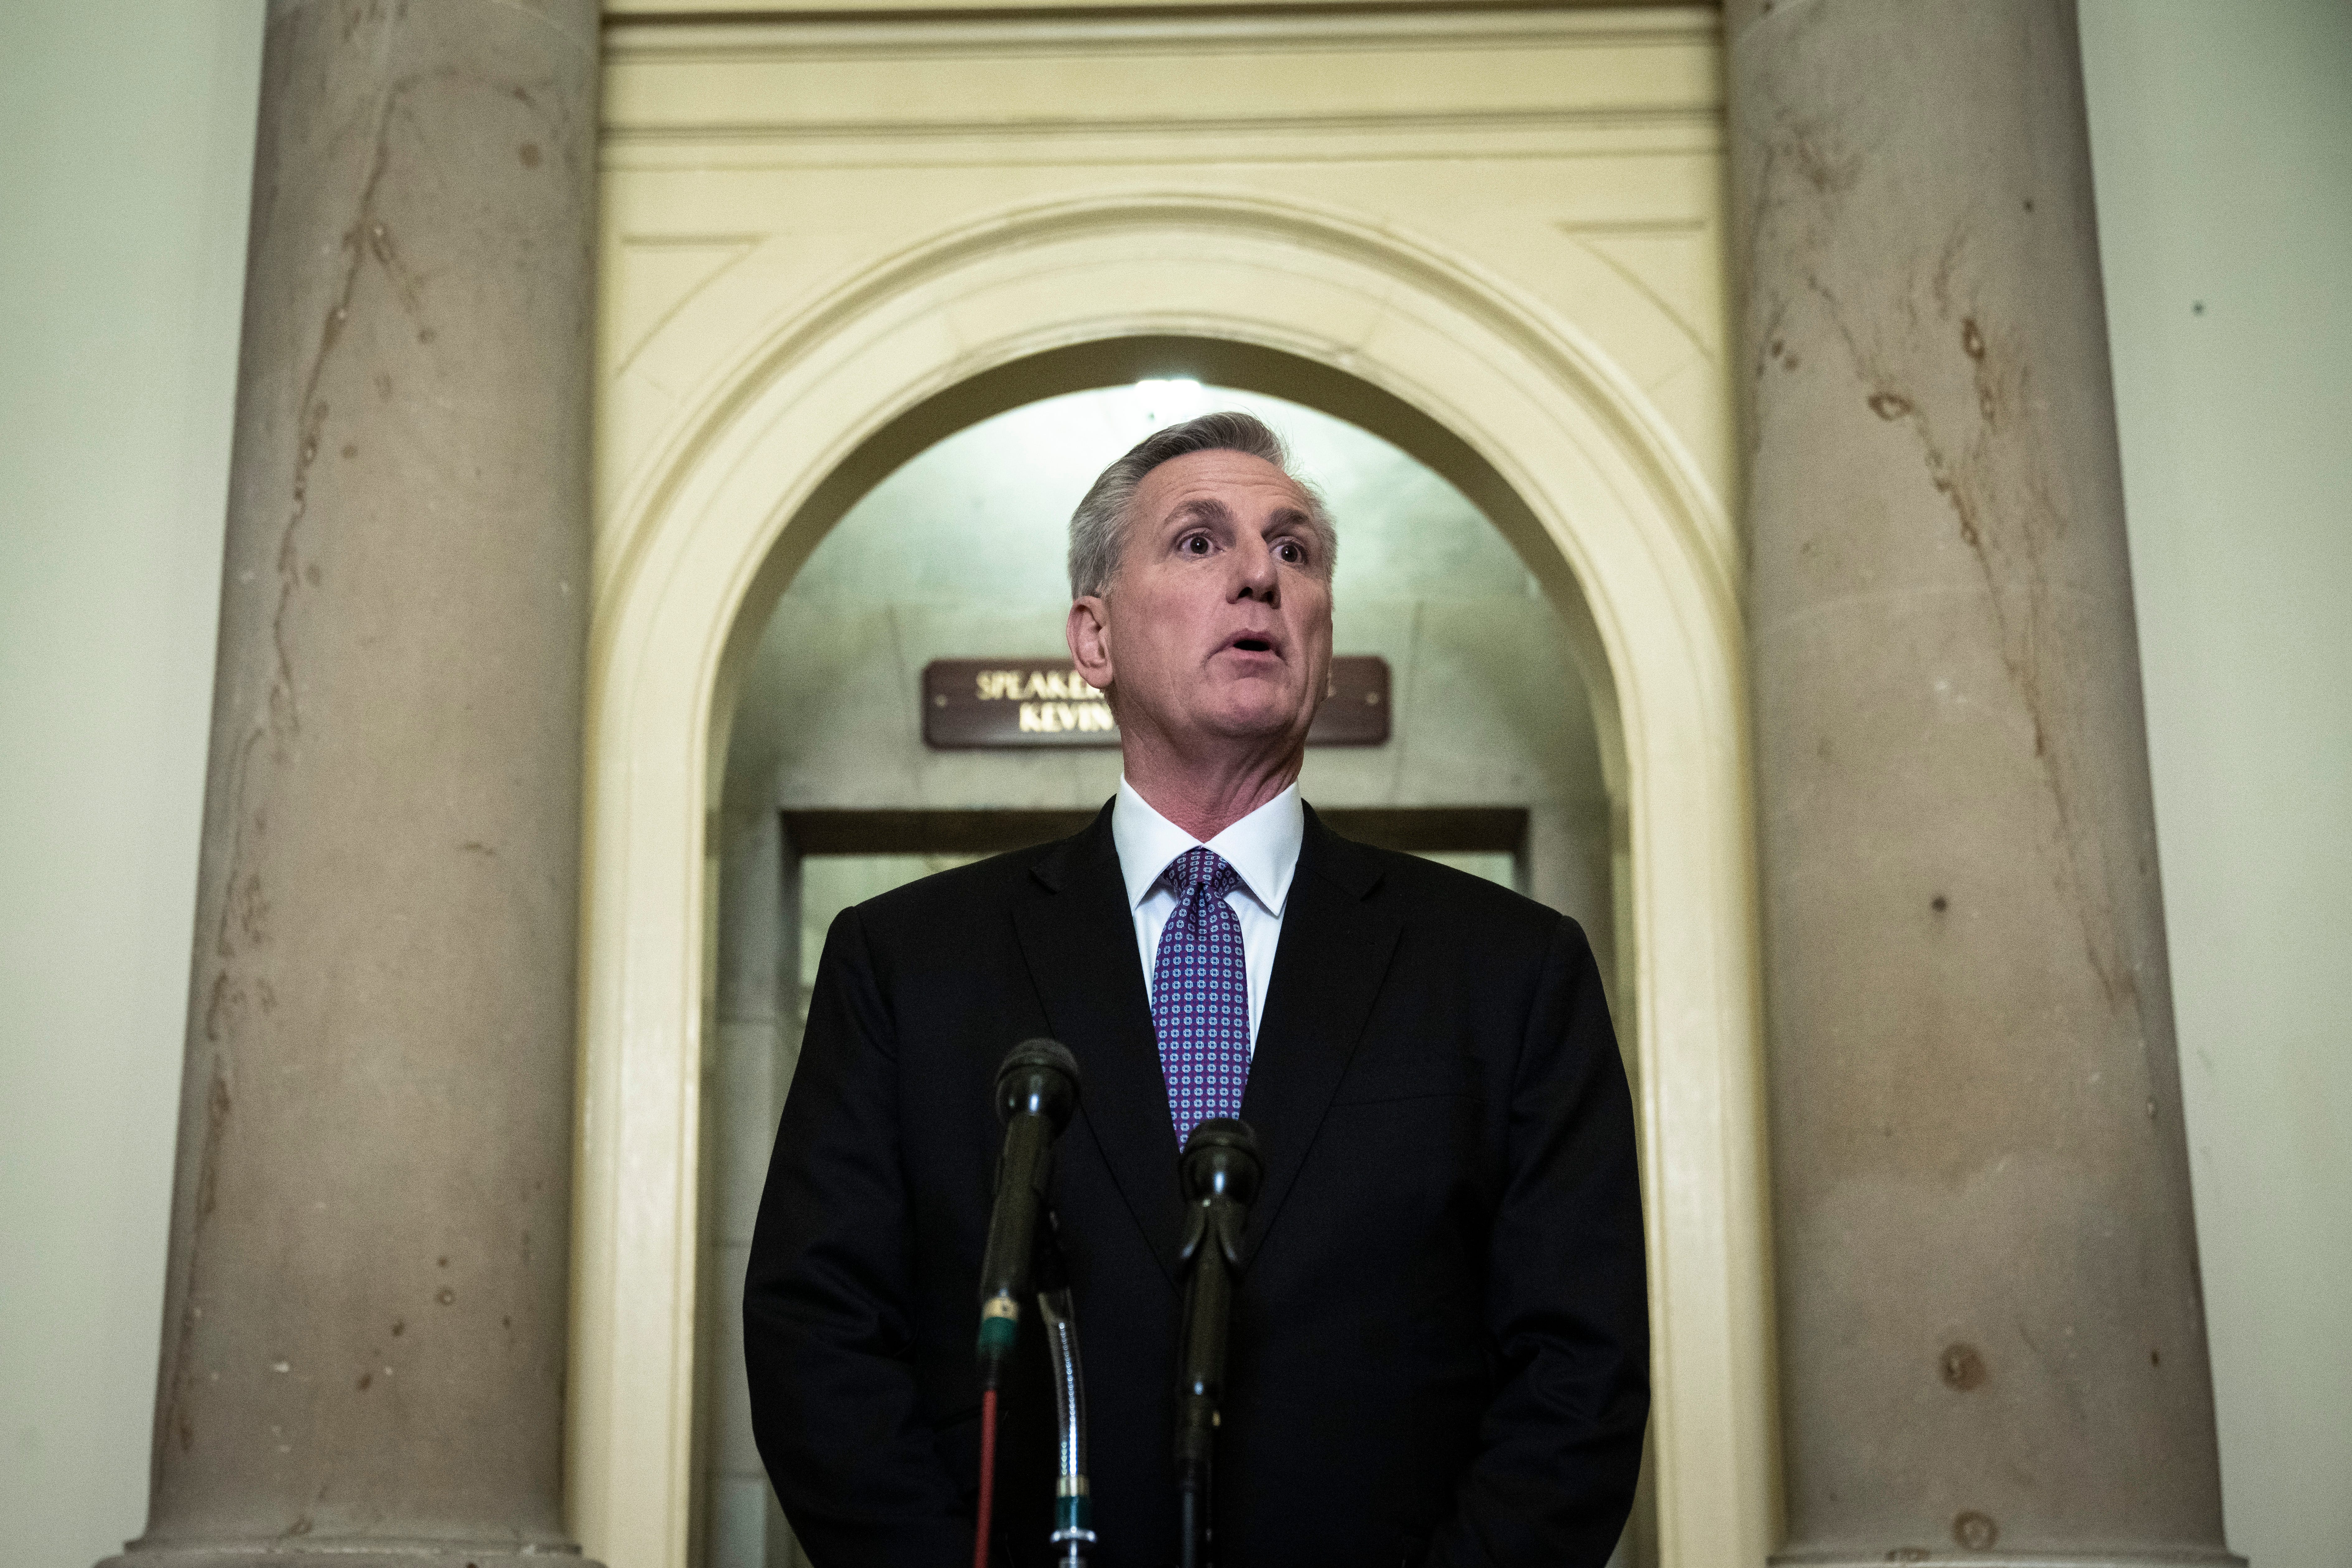 Speaker McCarthy: Santos will be removed from Congress if ethics probe finds he broke law